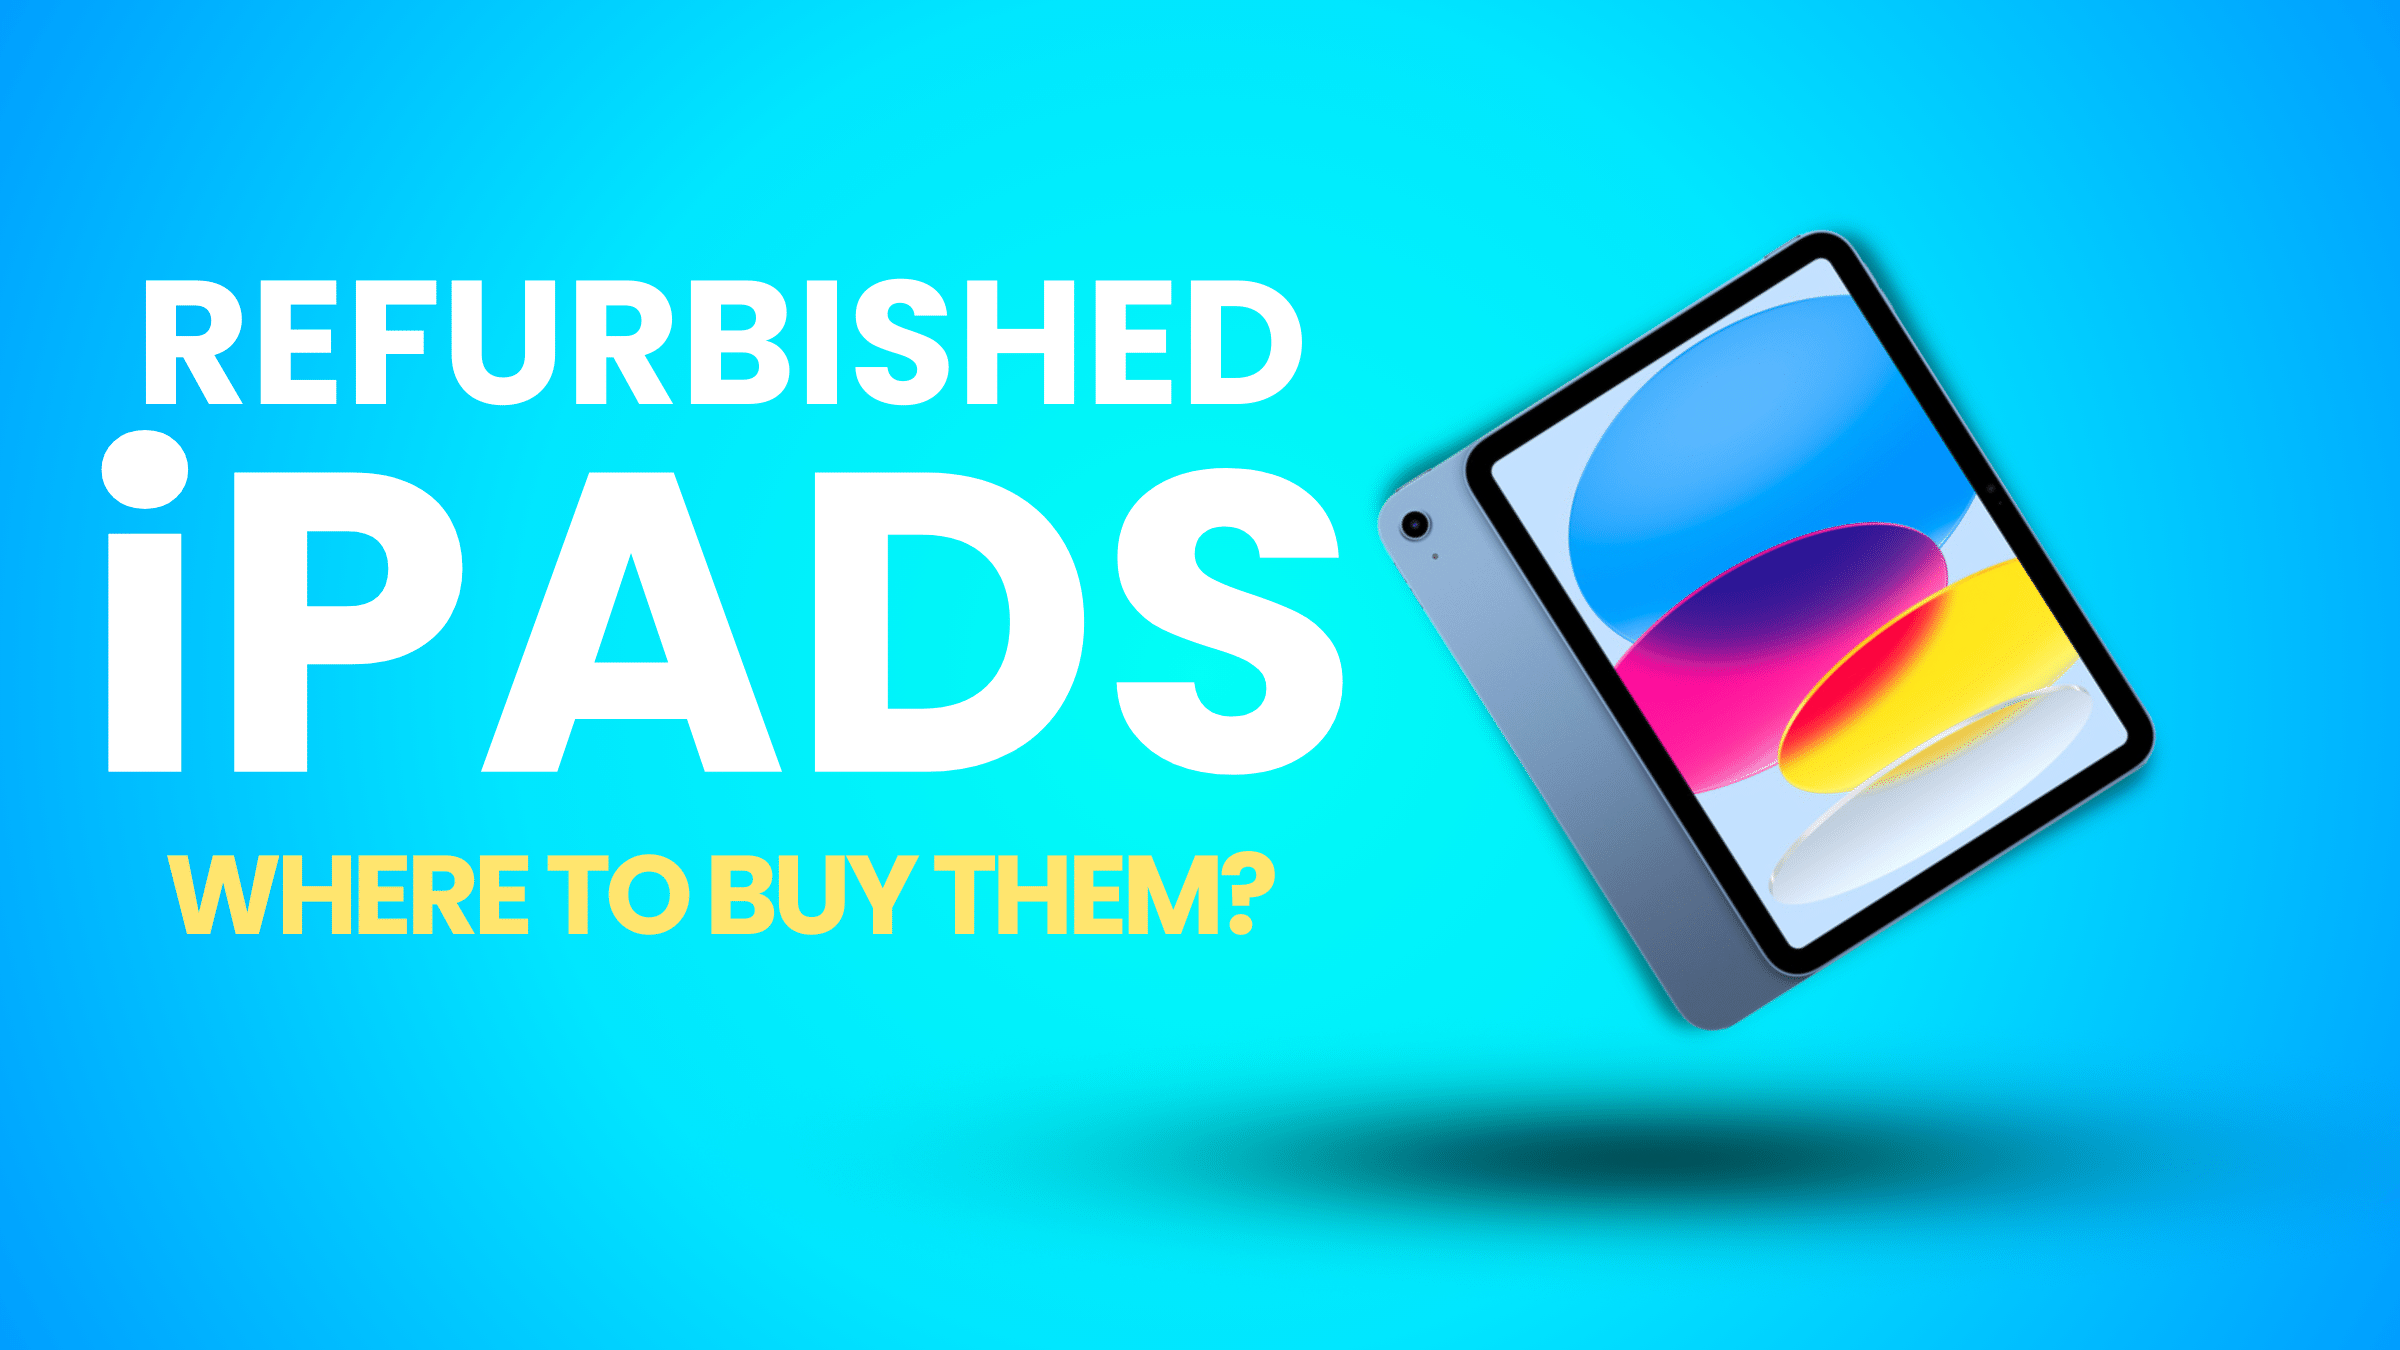 top 6 places where to buy refurbished ipads in US and UK